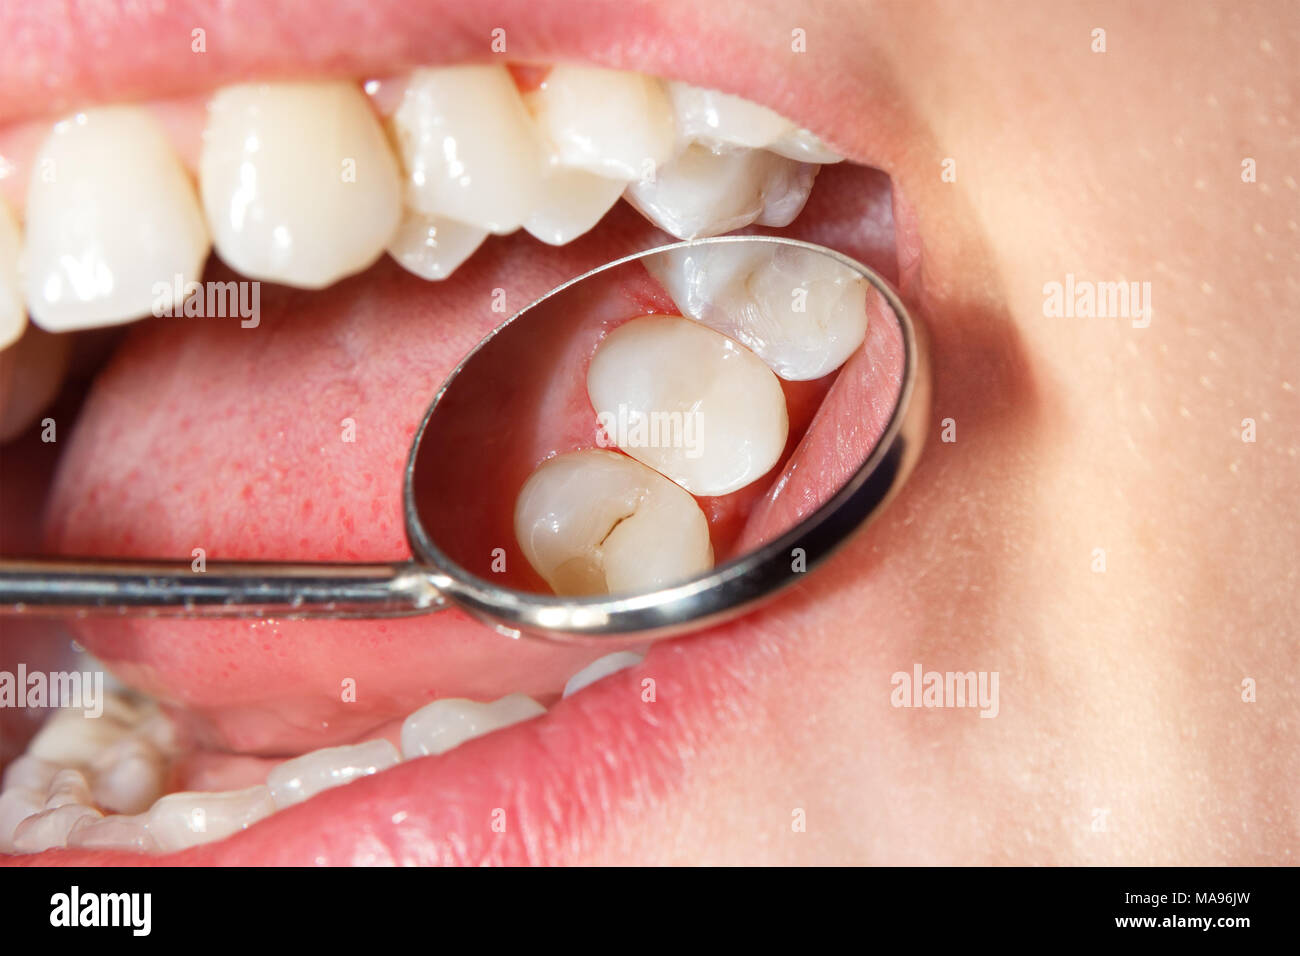 Dental treatment in the dental clinic. Rotten carious tooth close-up macro. Treatment of endodontic canals Stock Photo